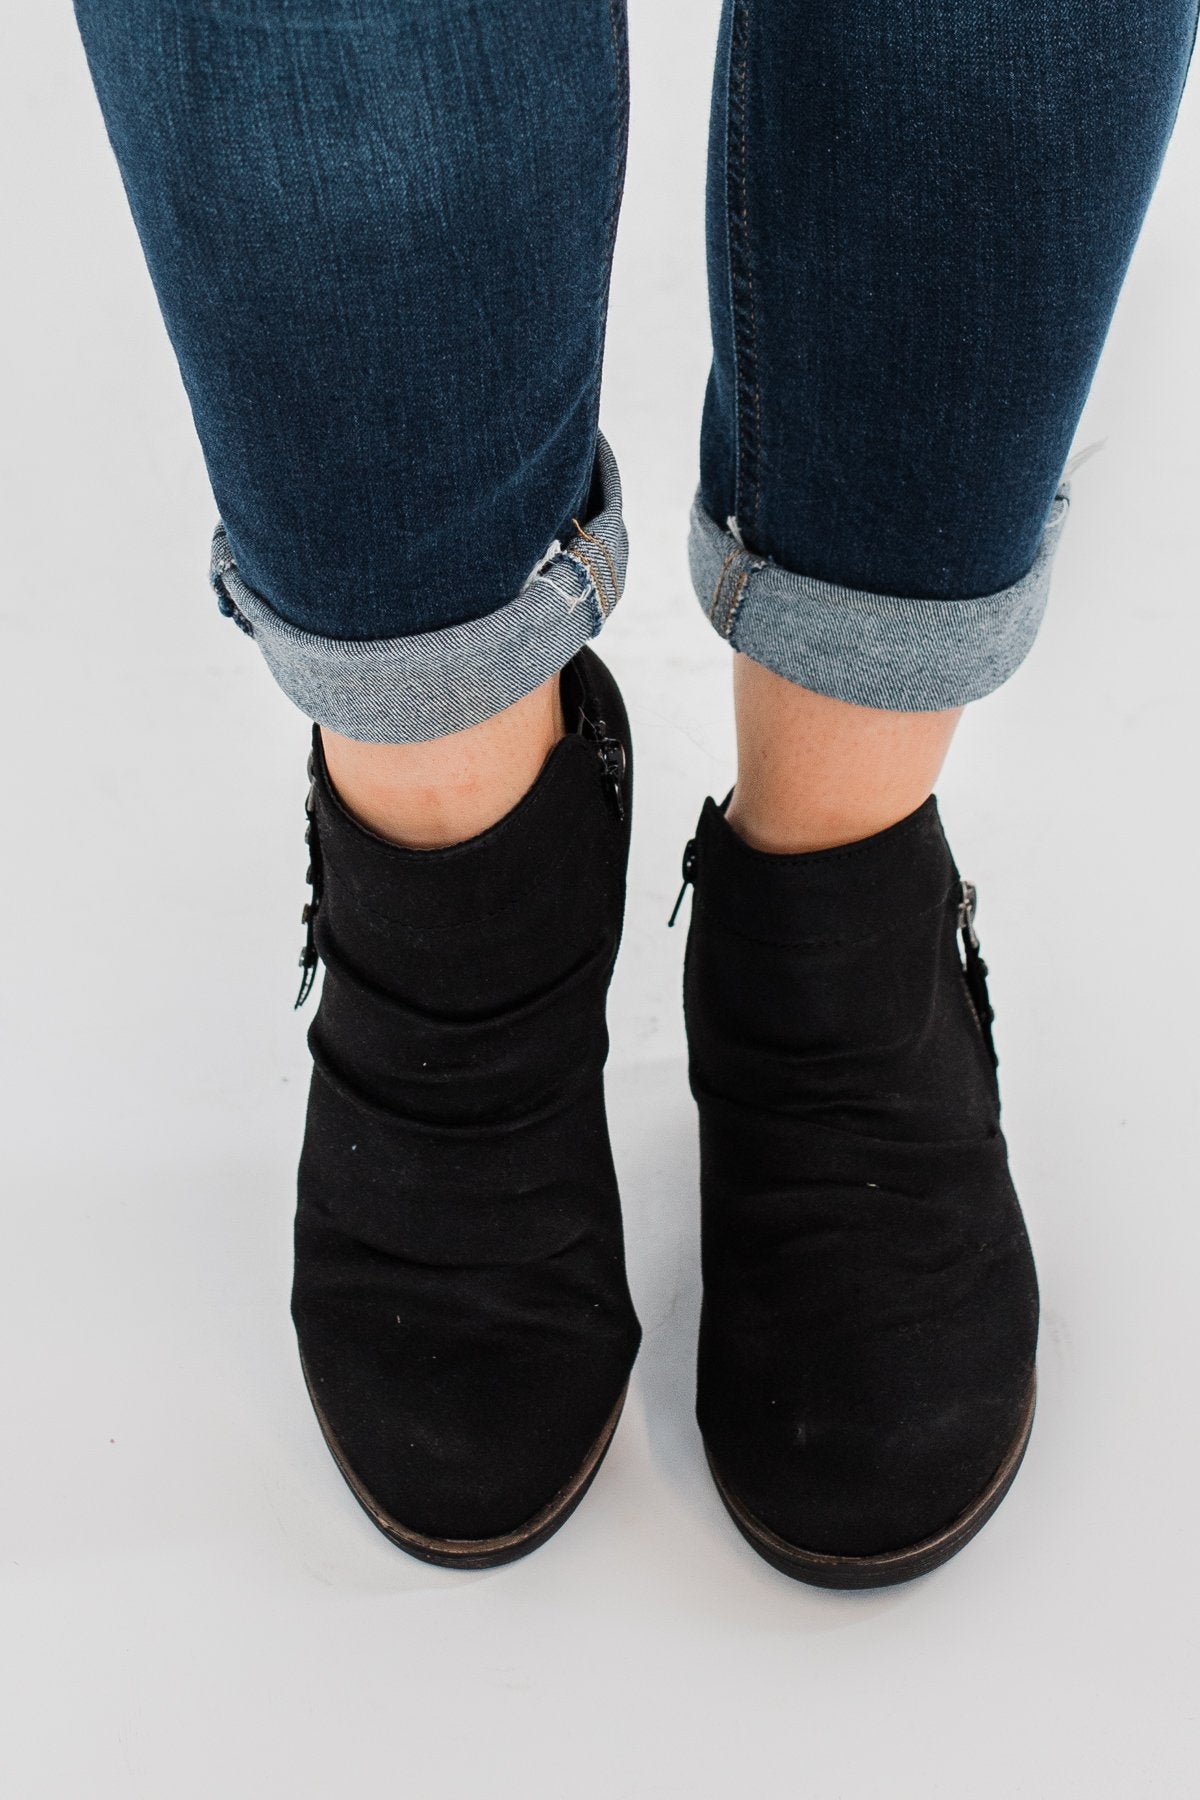 Rampage Wallace Booties- Black